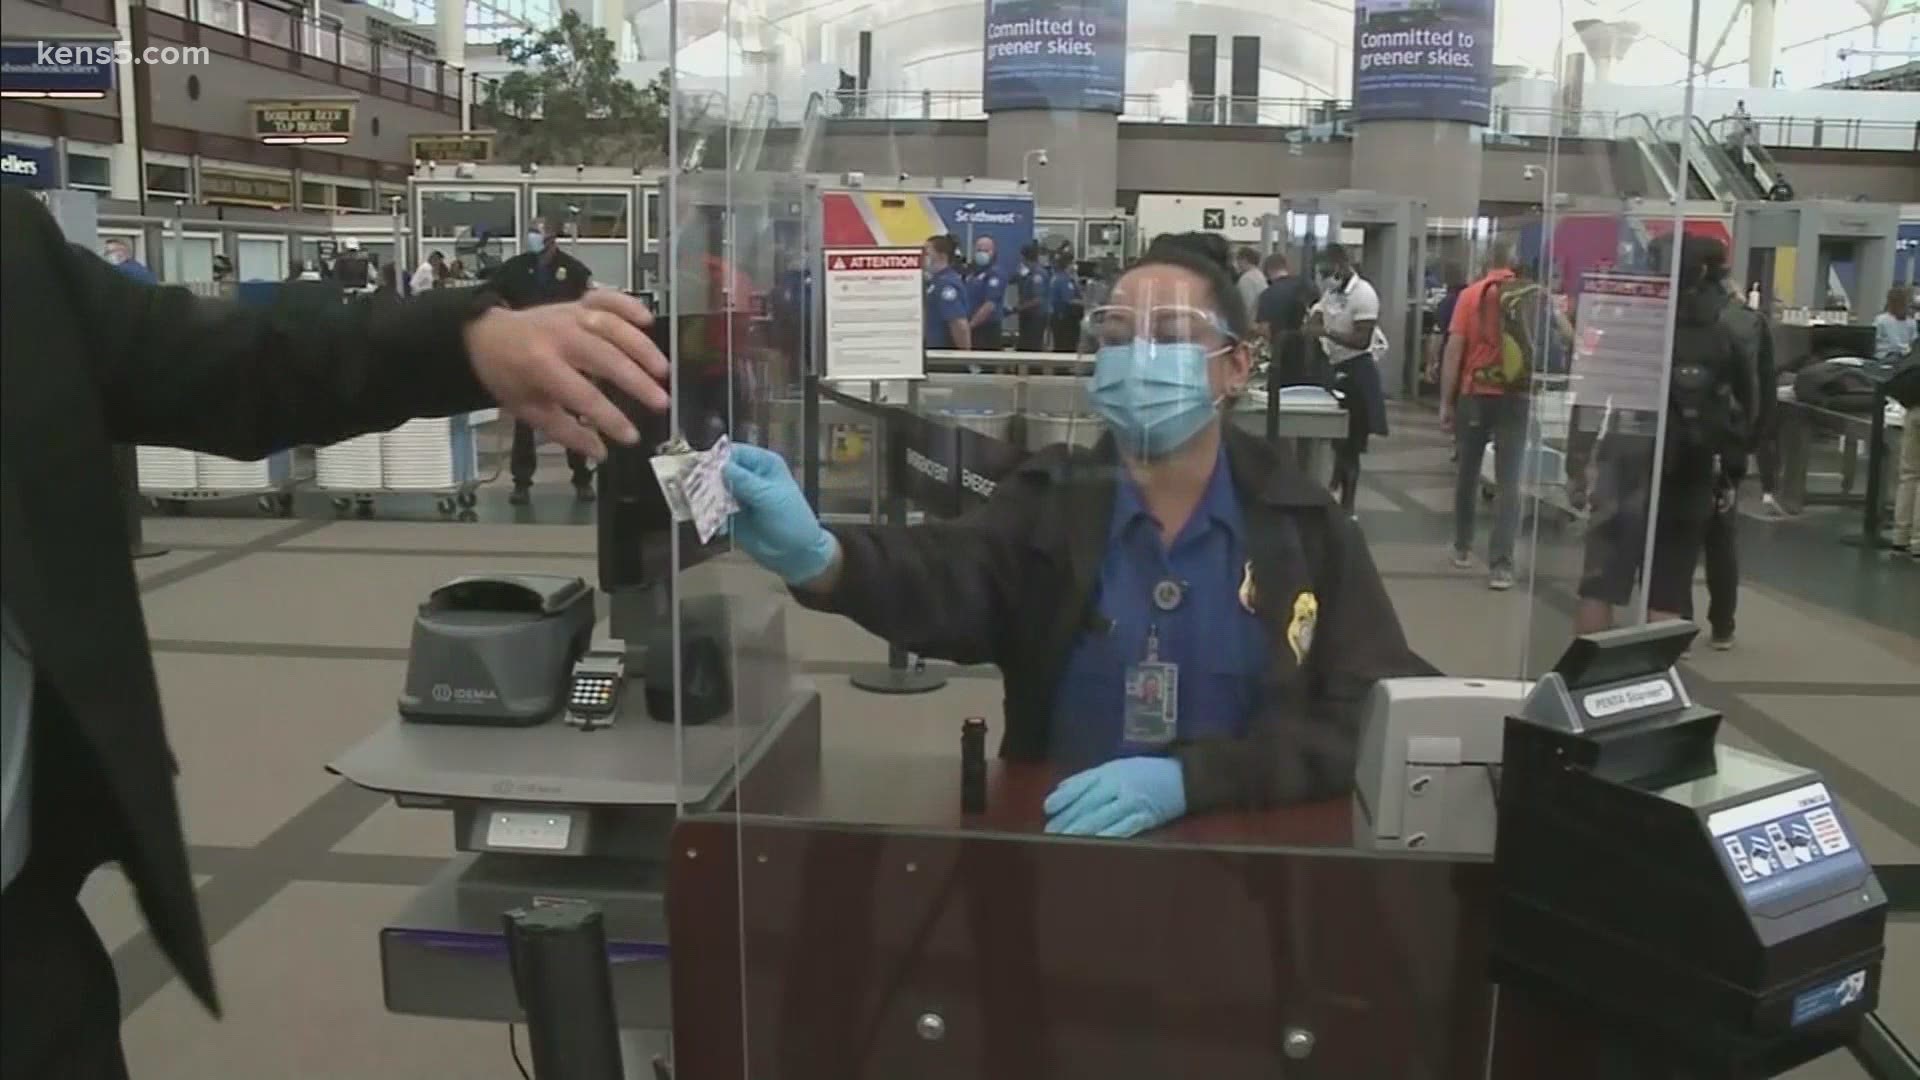 The Transportation Security Administration says it is preparing for an expected surge in summer travel for 2021. There will be virtual job fairs to hire workers.